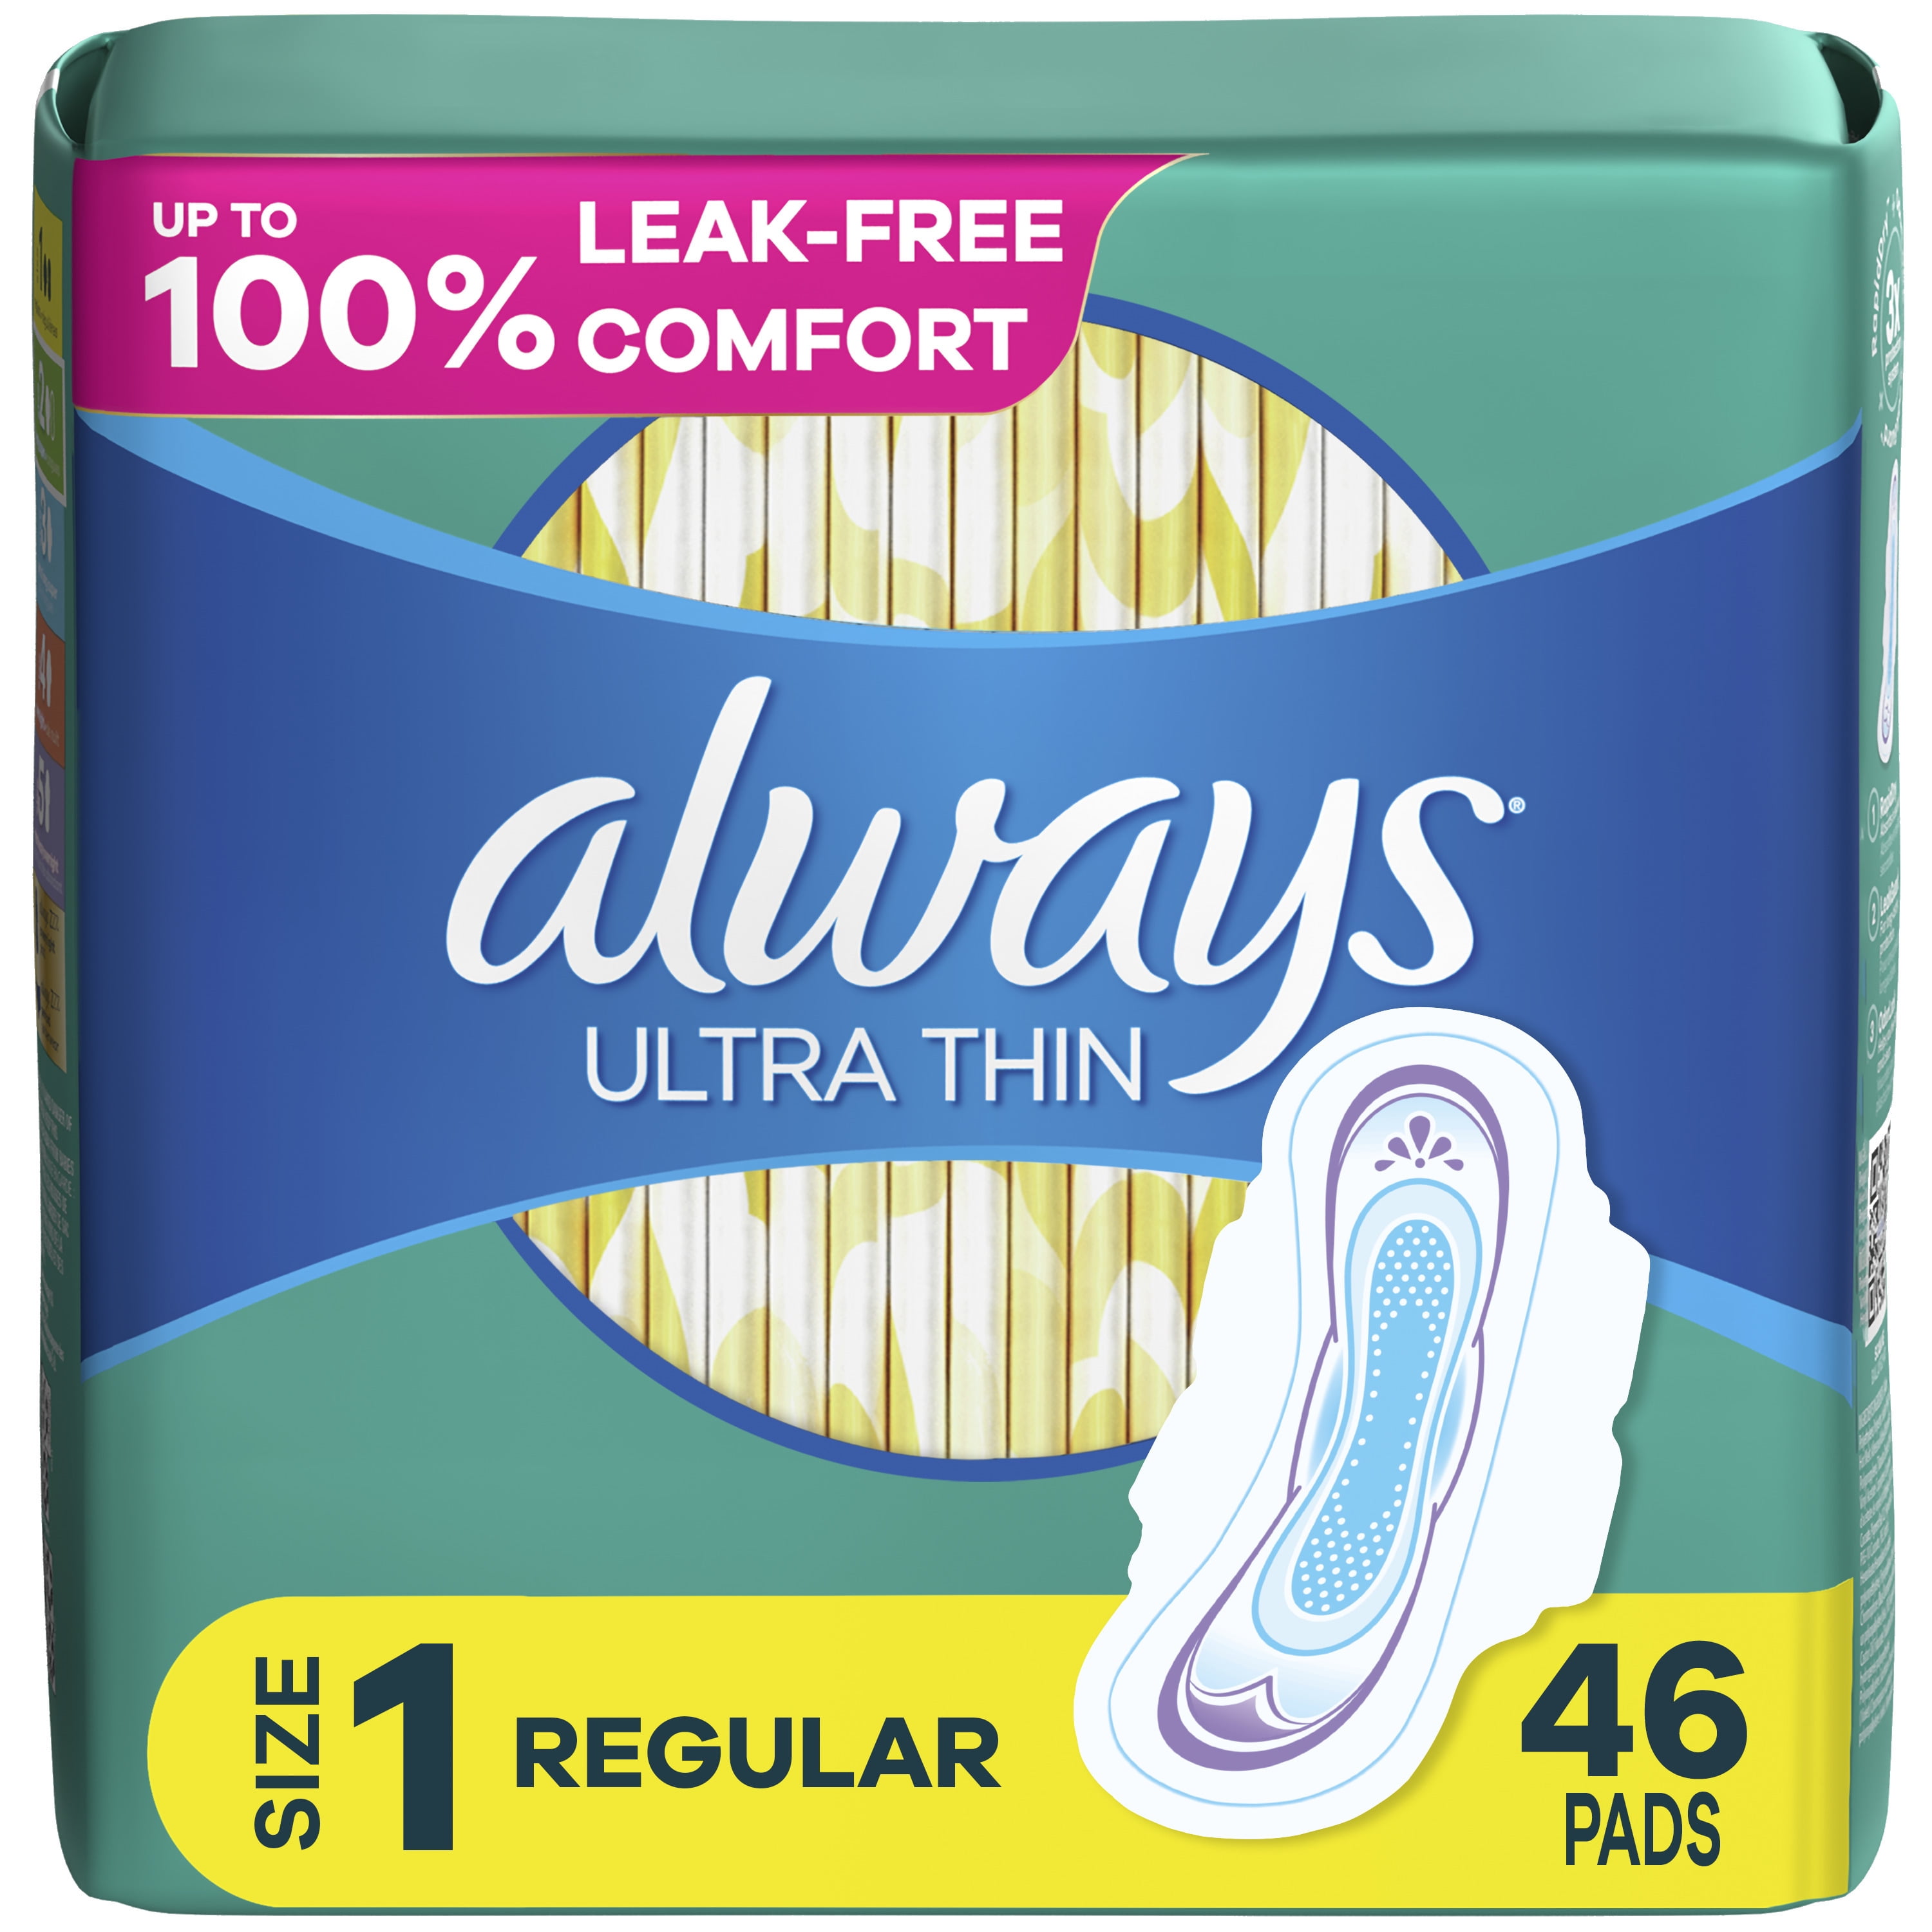 Always Long and Super Maxi Pads with Flexi-Wings Multi Pack, 90 Ct.